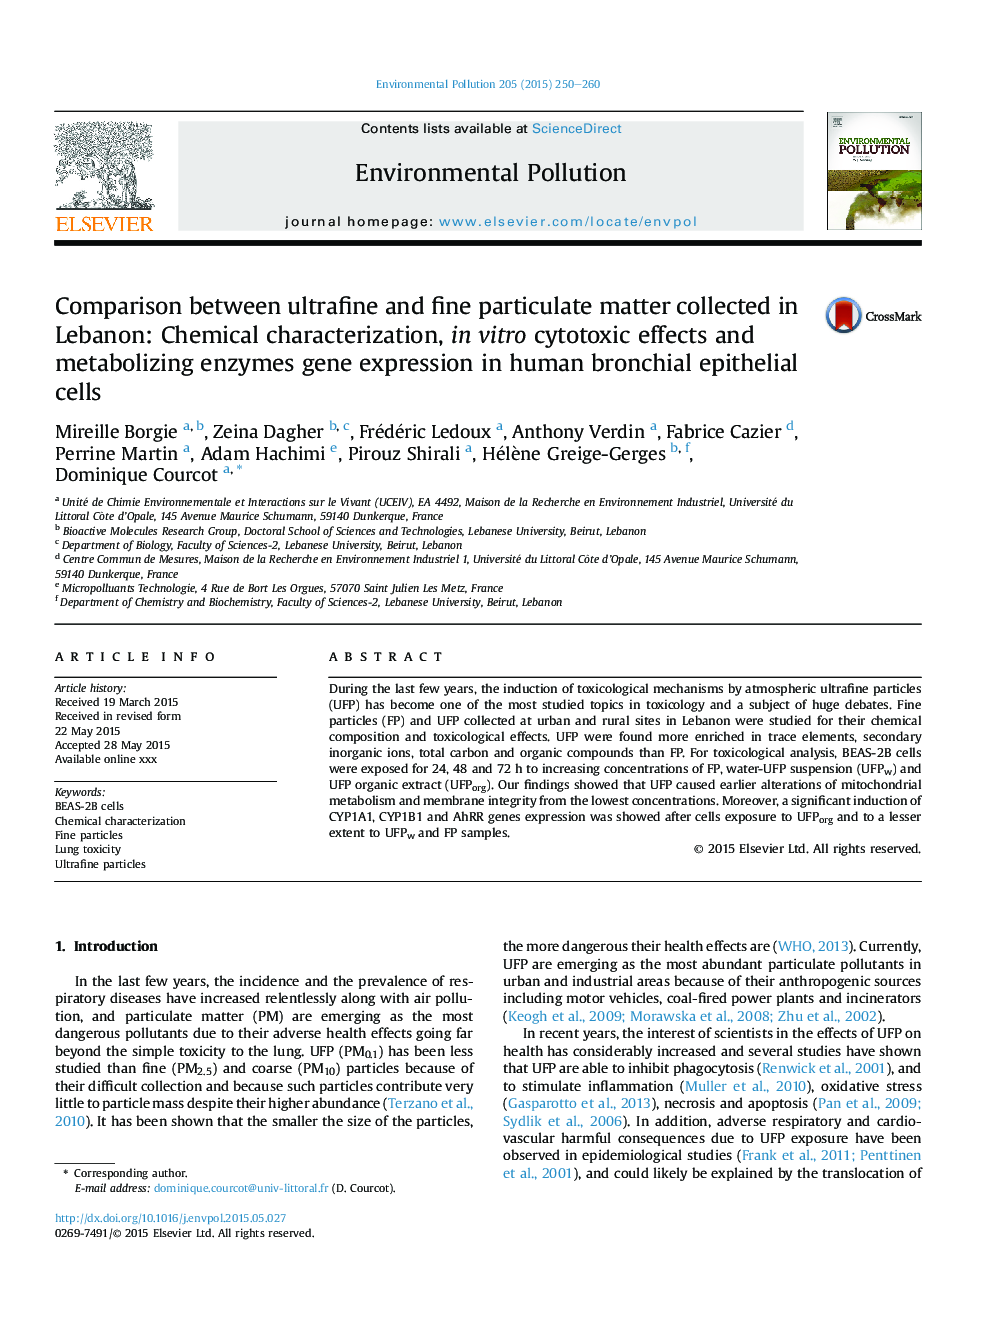 Comparison between ultrafine and fine particulate matter collected in Lebanon: Chemical characterization, inÂ vitro cytotoxic effects and metabolizing enzymes gene expression in human bronchial epithelial cells